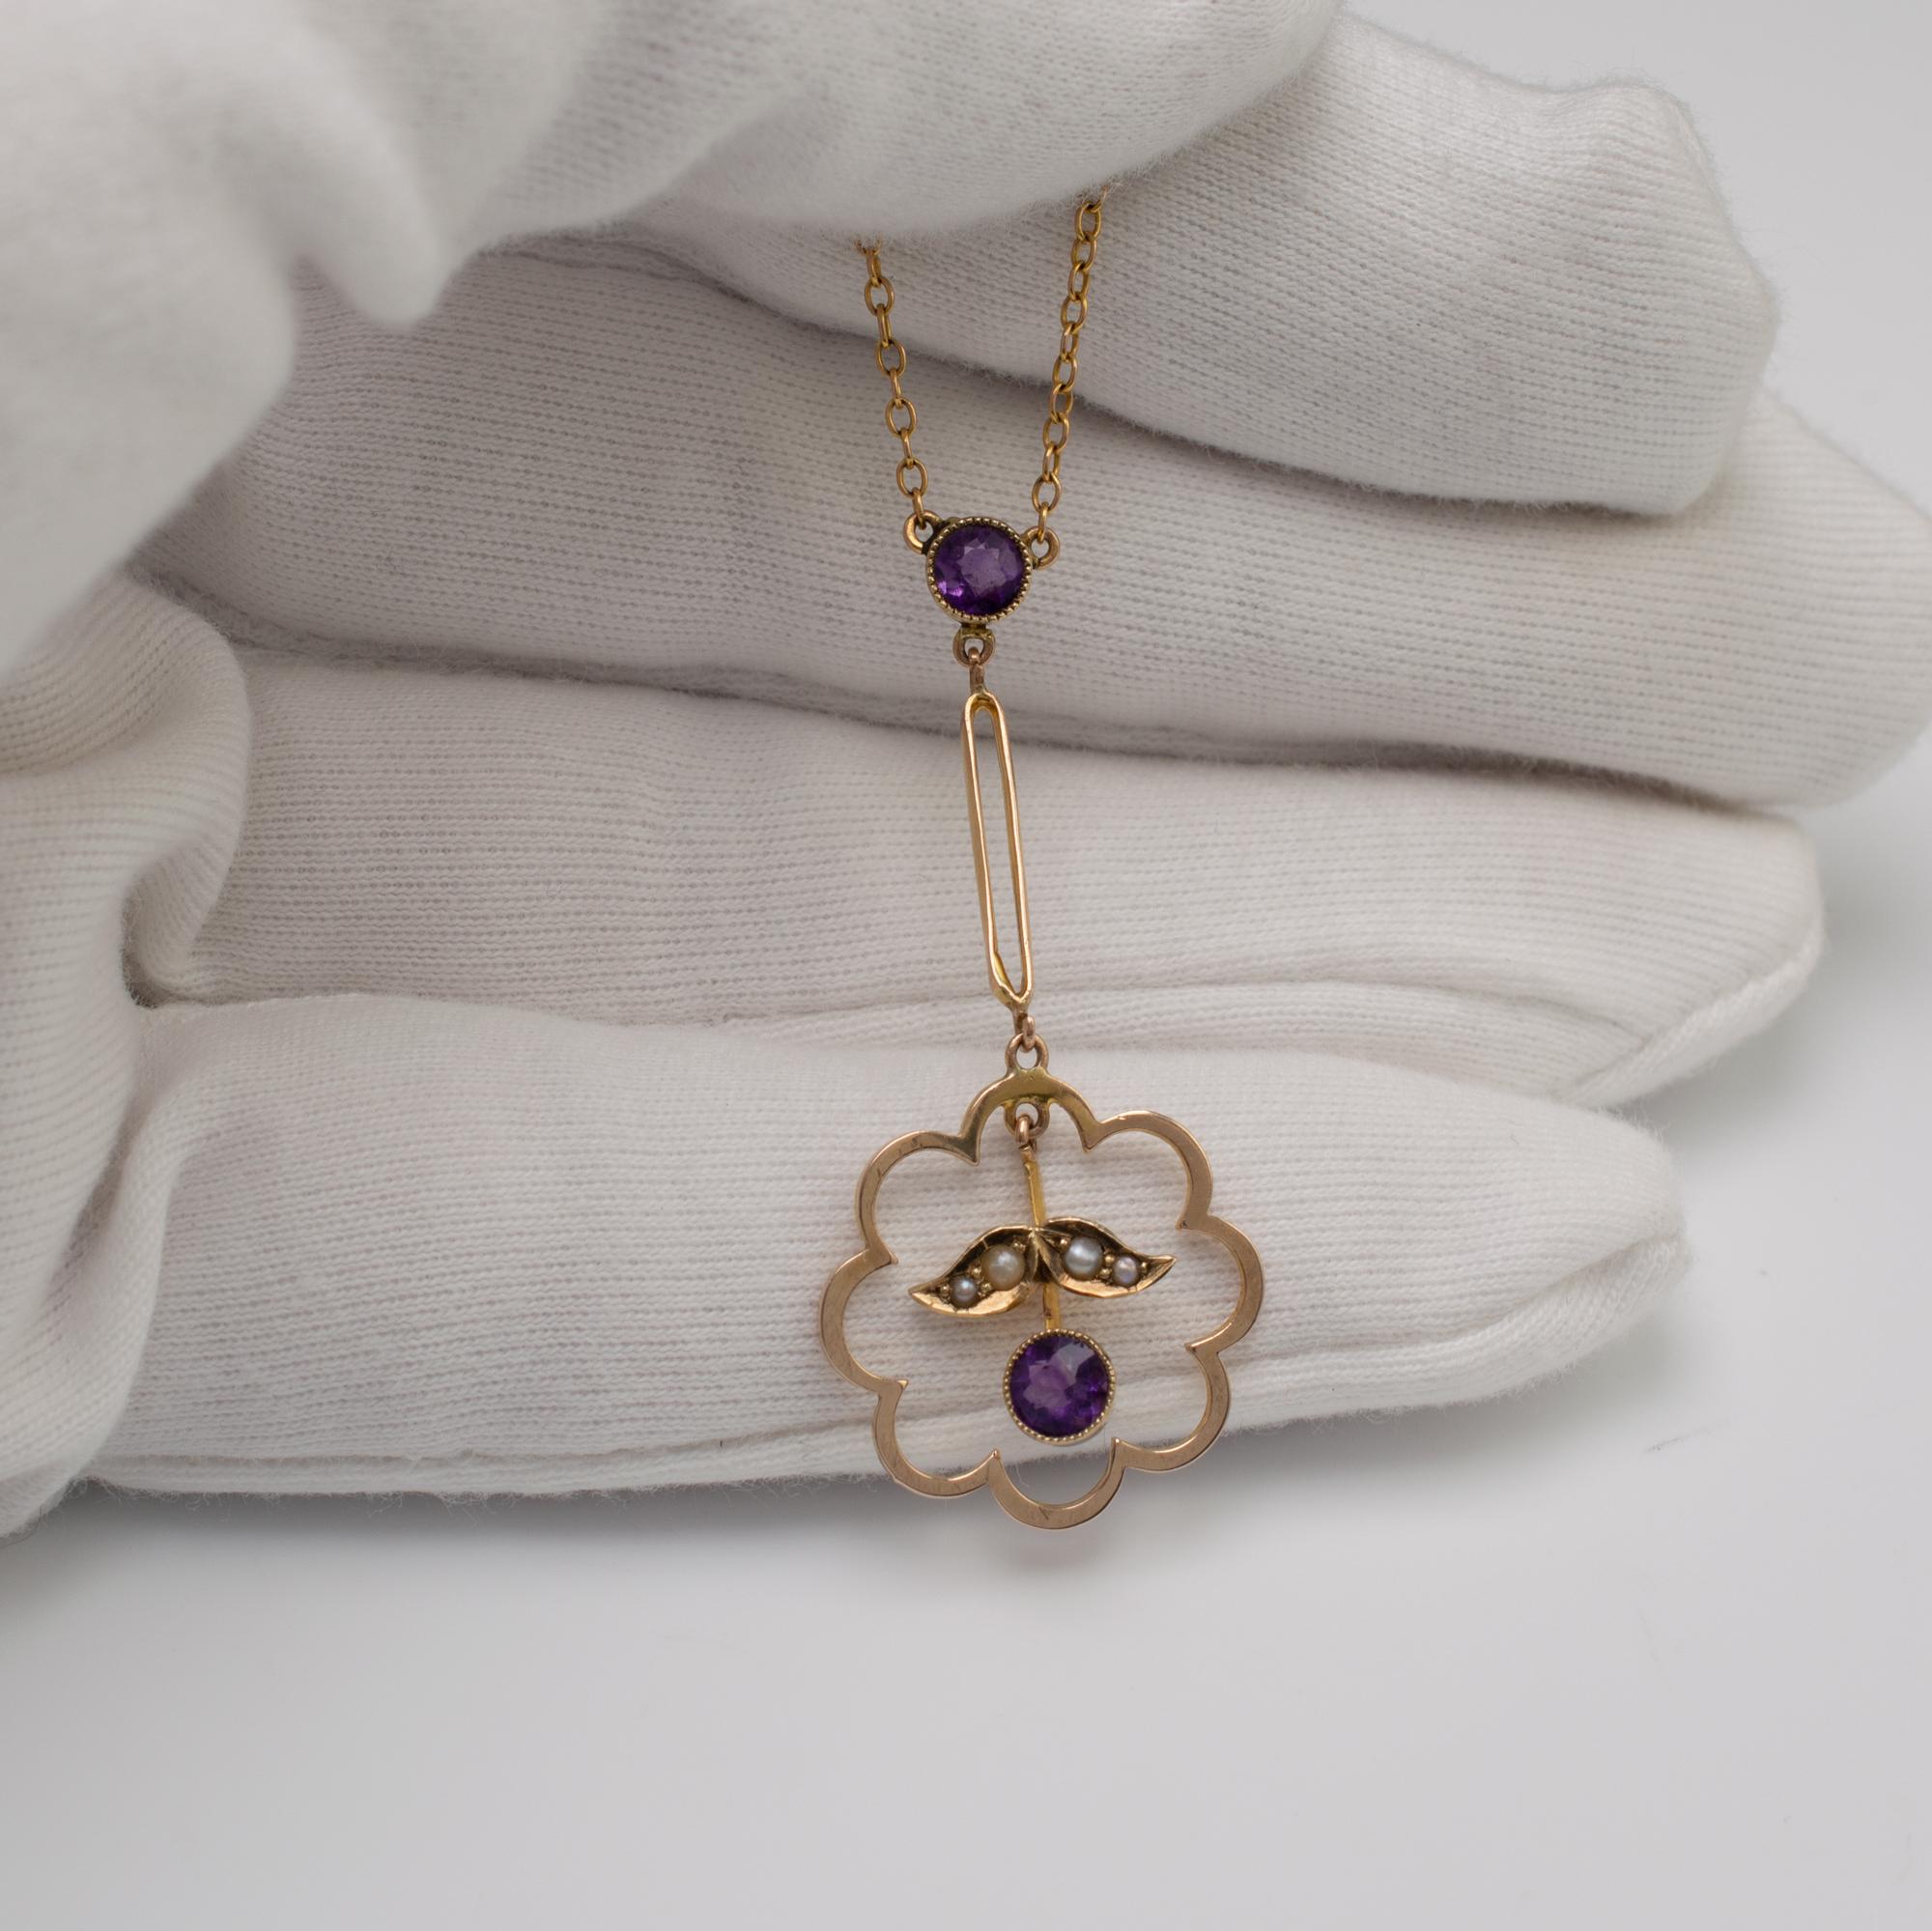 This beautiful vintage amethyst and pearl pendant features a hanging amethyst with graduated pearls set in leaf shapes to form a flower or fruit within the scallop shape gold frame with further amethyst to the top of the pendant with a split